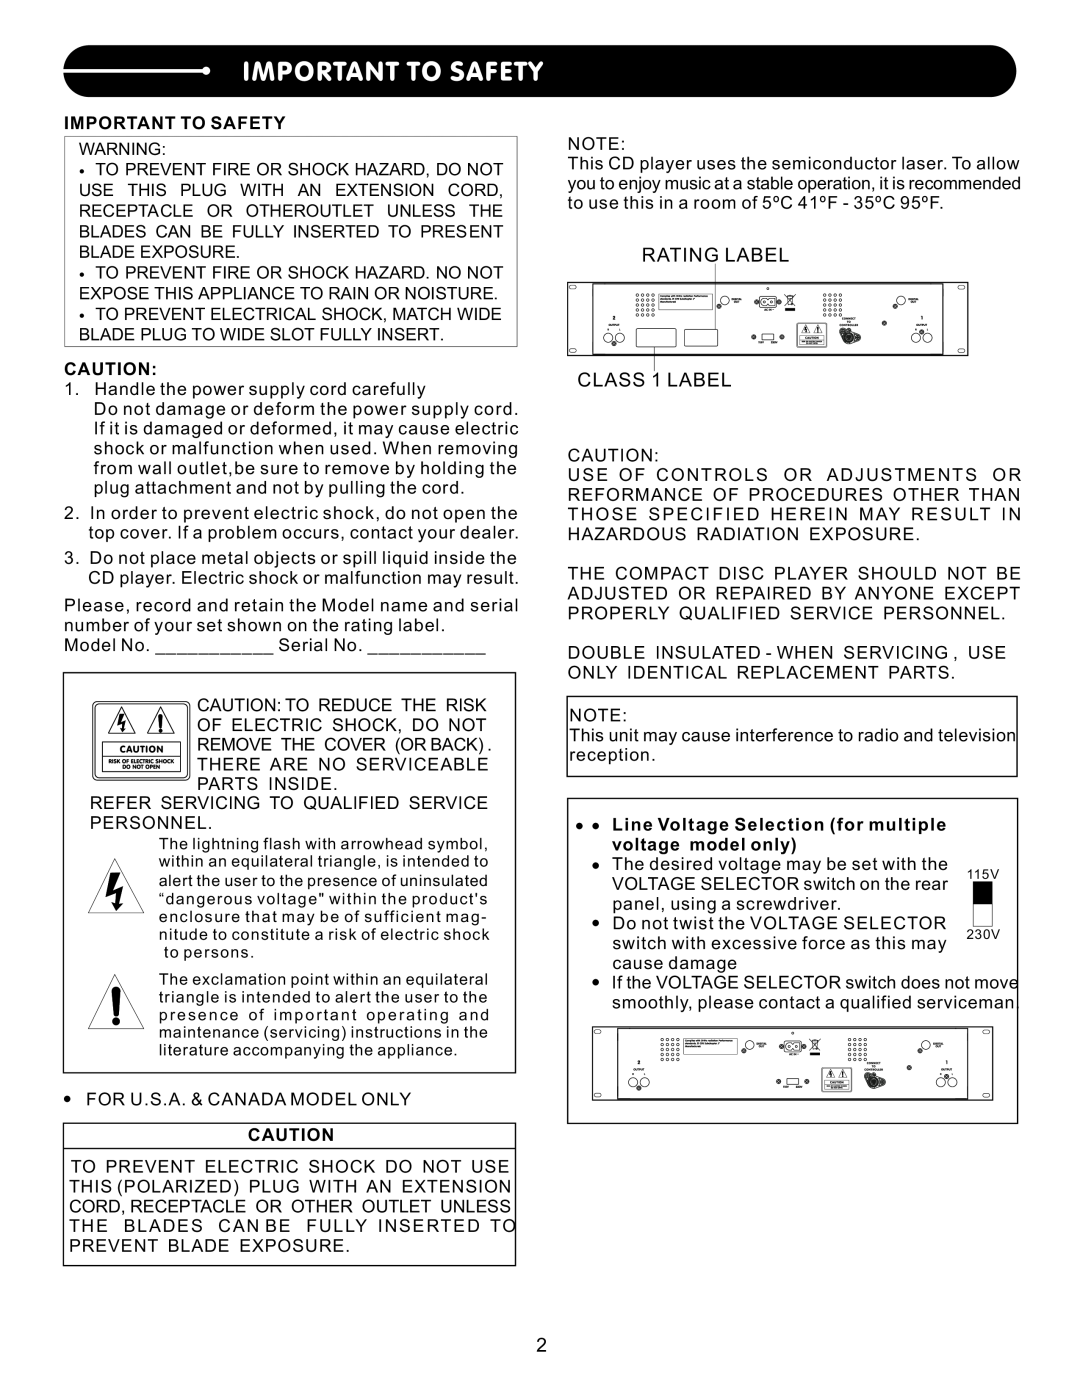 Stanton C.502 user manual RATING LABEL CLASS 1 LABEL, Important To Safety 